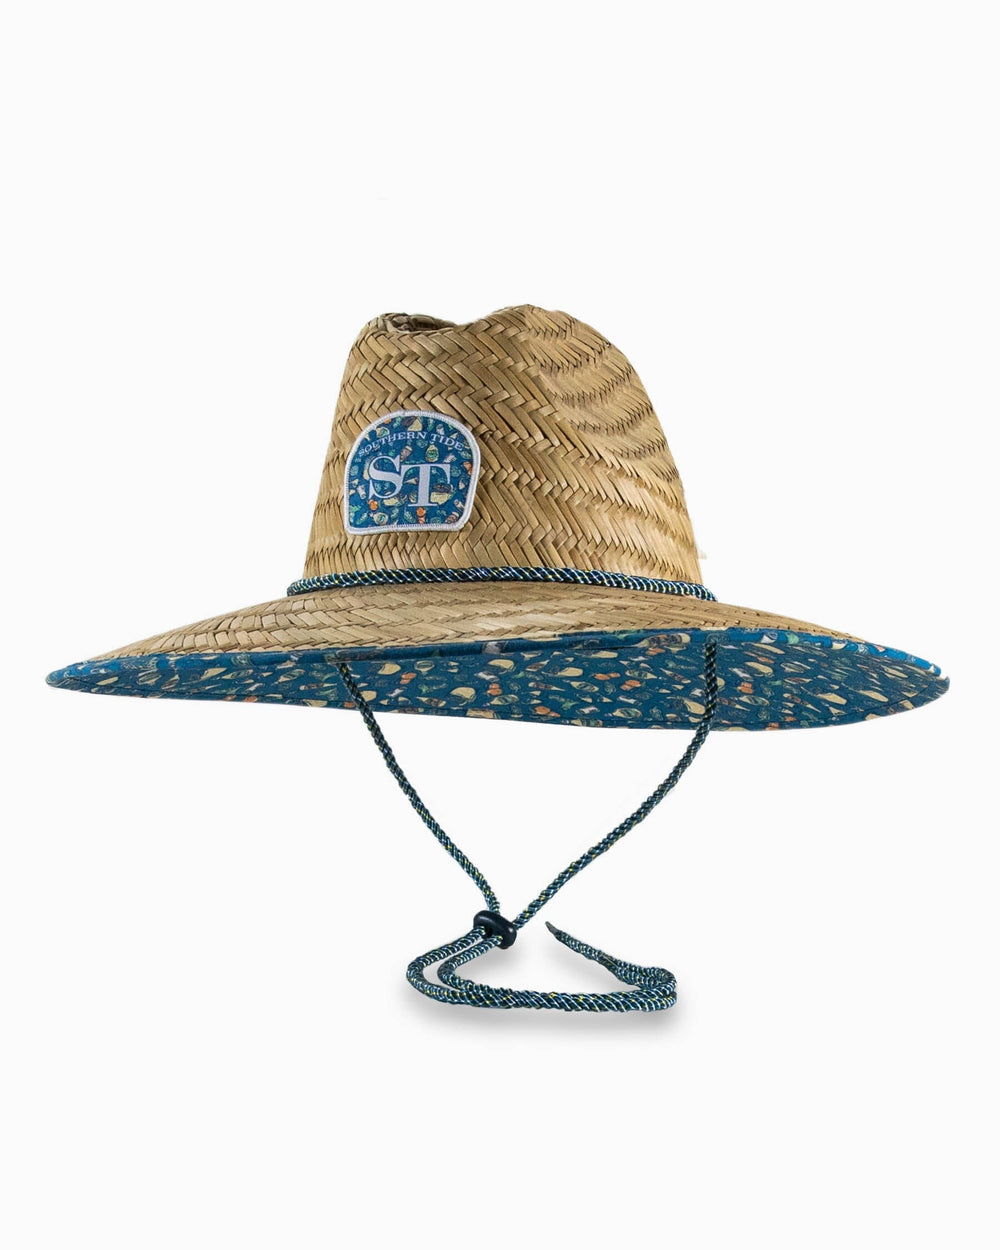 Marg Madness Straw Hat